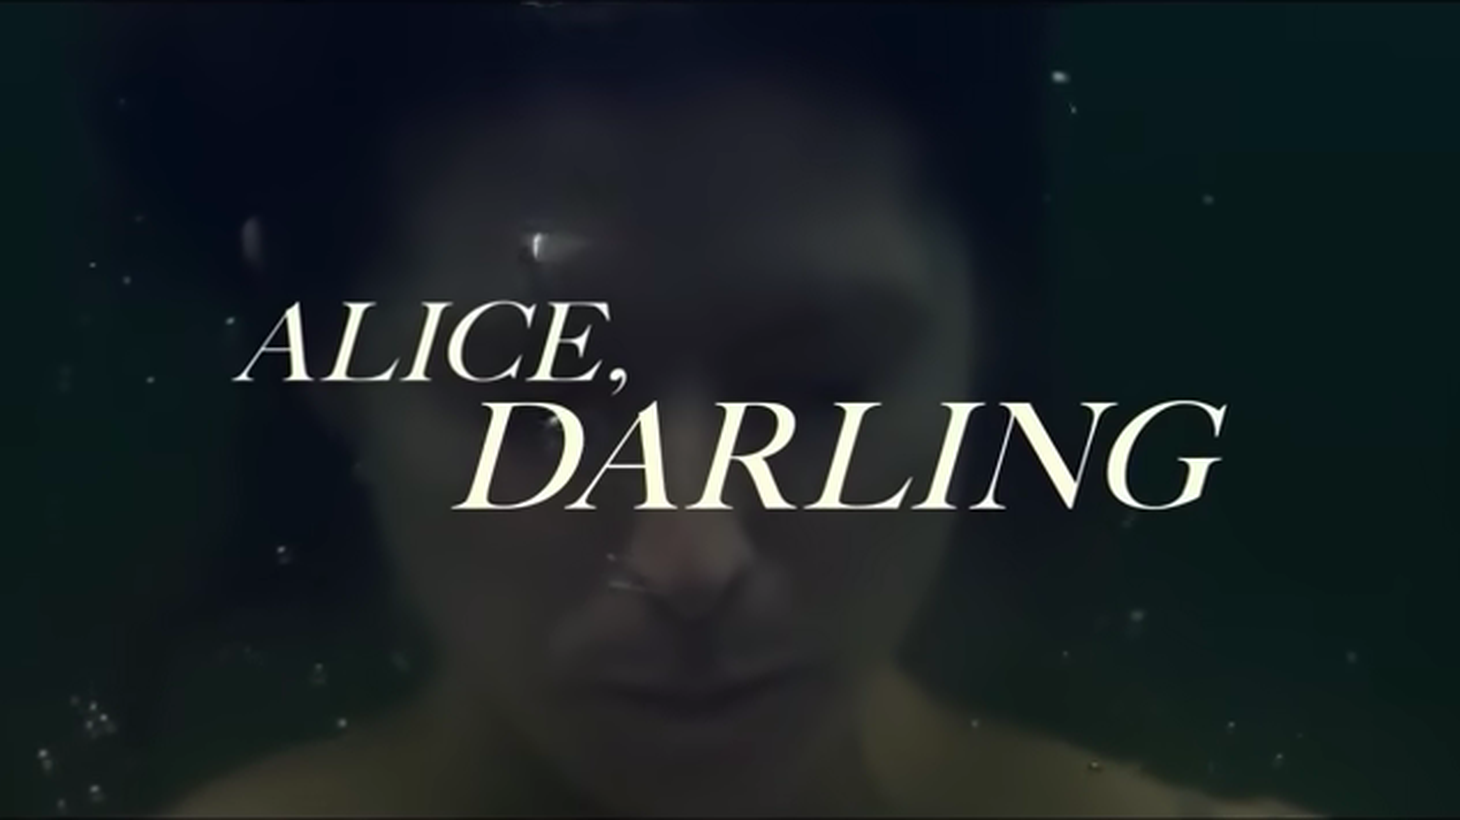 “Alice, Darling” follows a young woman who is in a psychologically abusive relationship, and it’s mostly set at a lakeside cottage.